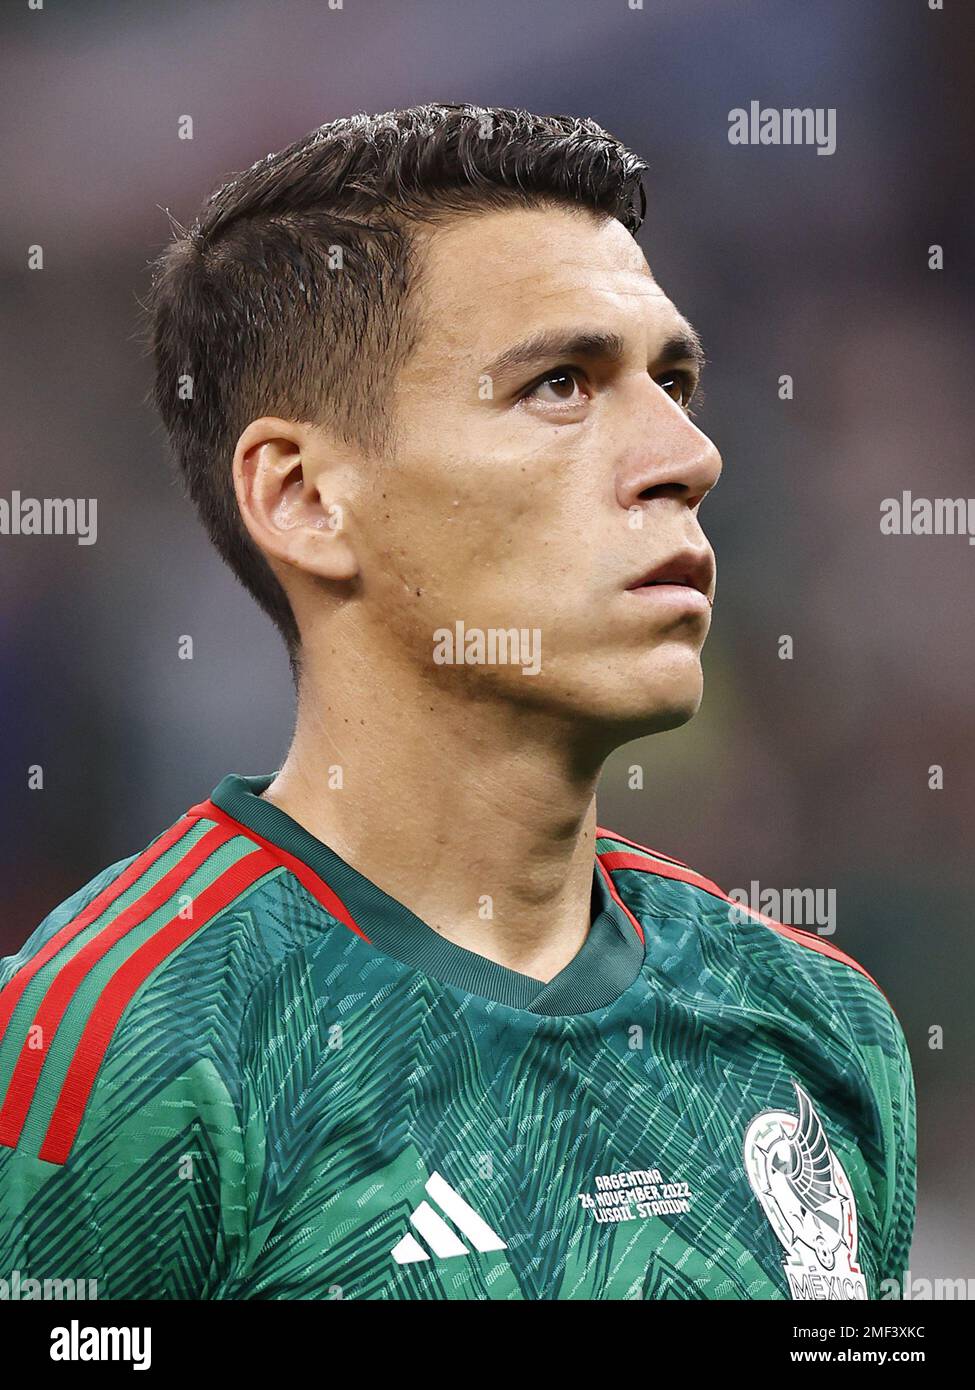 LUSAIL CITY - Hector Moreno of Mexico during the FIFA World Cup Qatar 2022 group C match between Argentina and Mexico at Lusail Stadium on November 26, 2022 in Lusail City, Qatar. AP | Dutch Height | MAURICE OF STONE Stock Photo